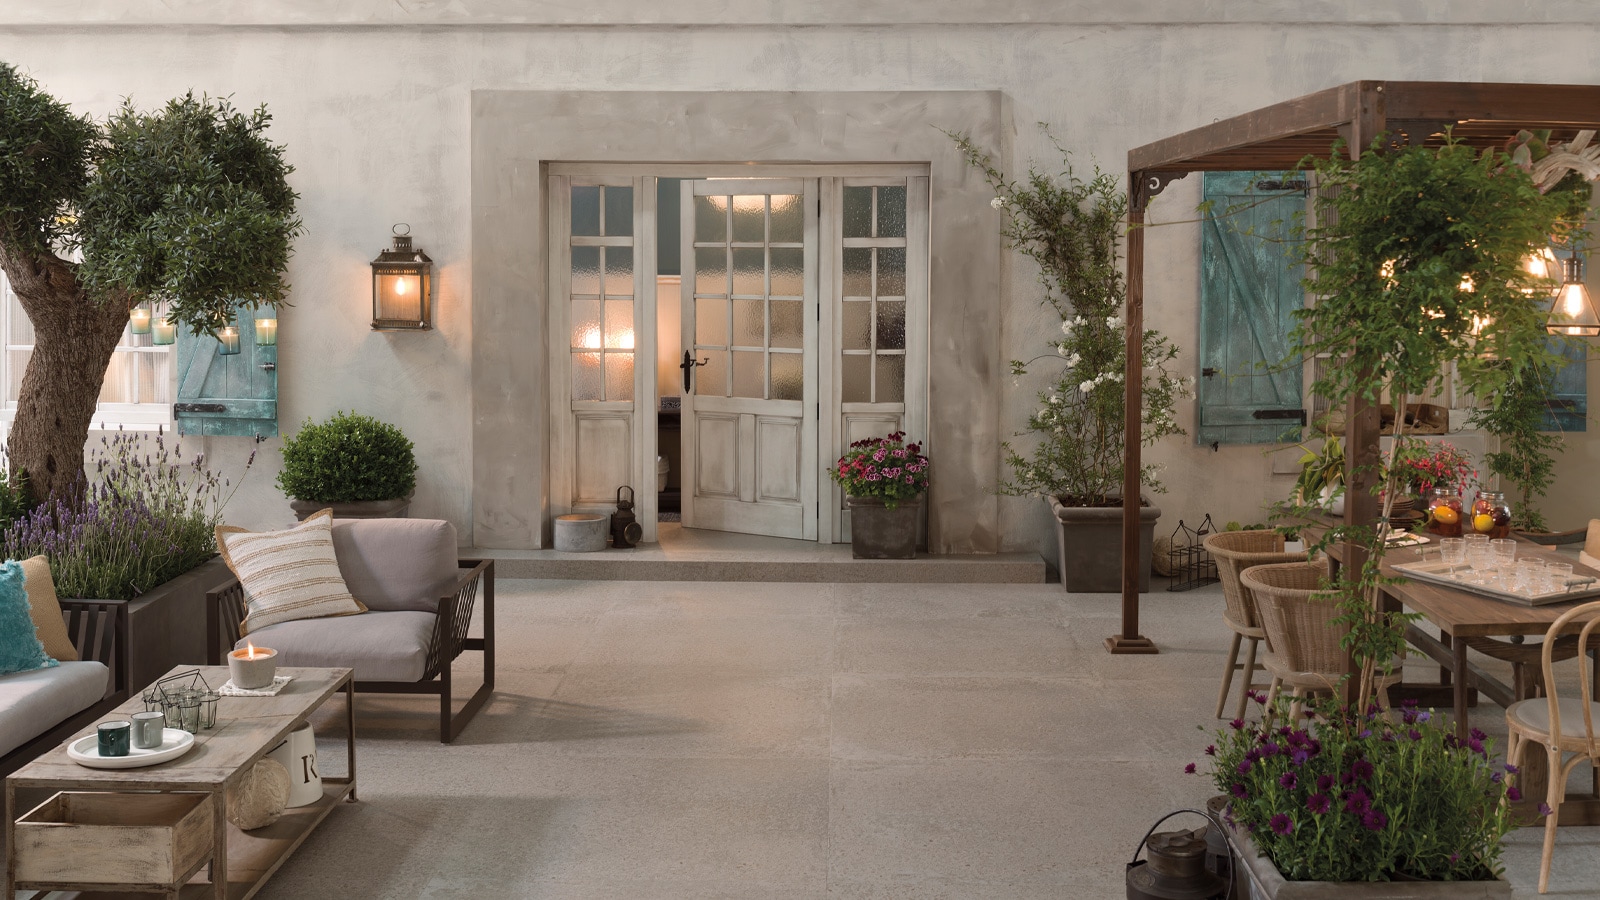 The natural beauty of Provence inspires Porcelanosa's collections